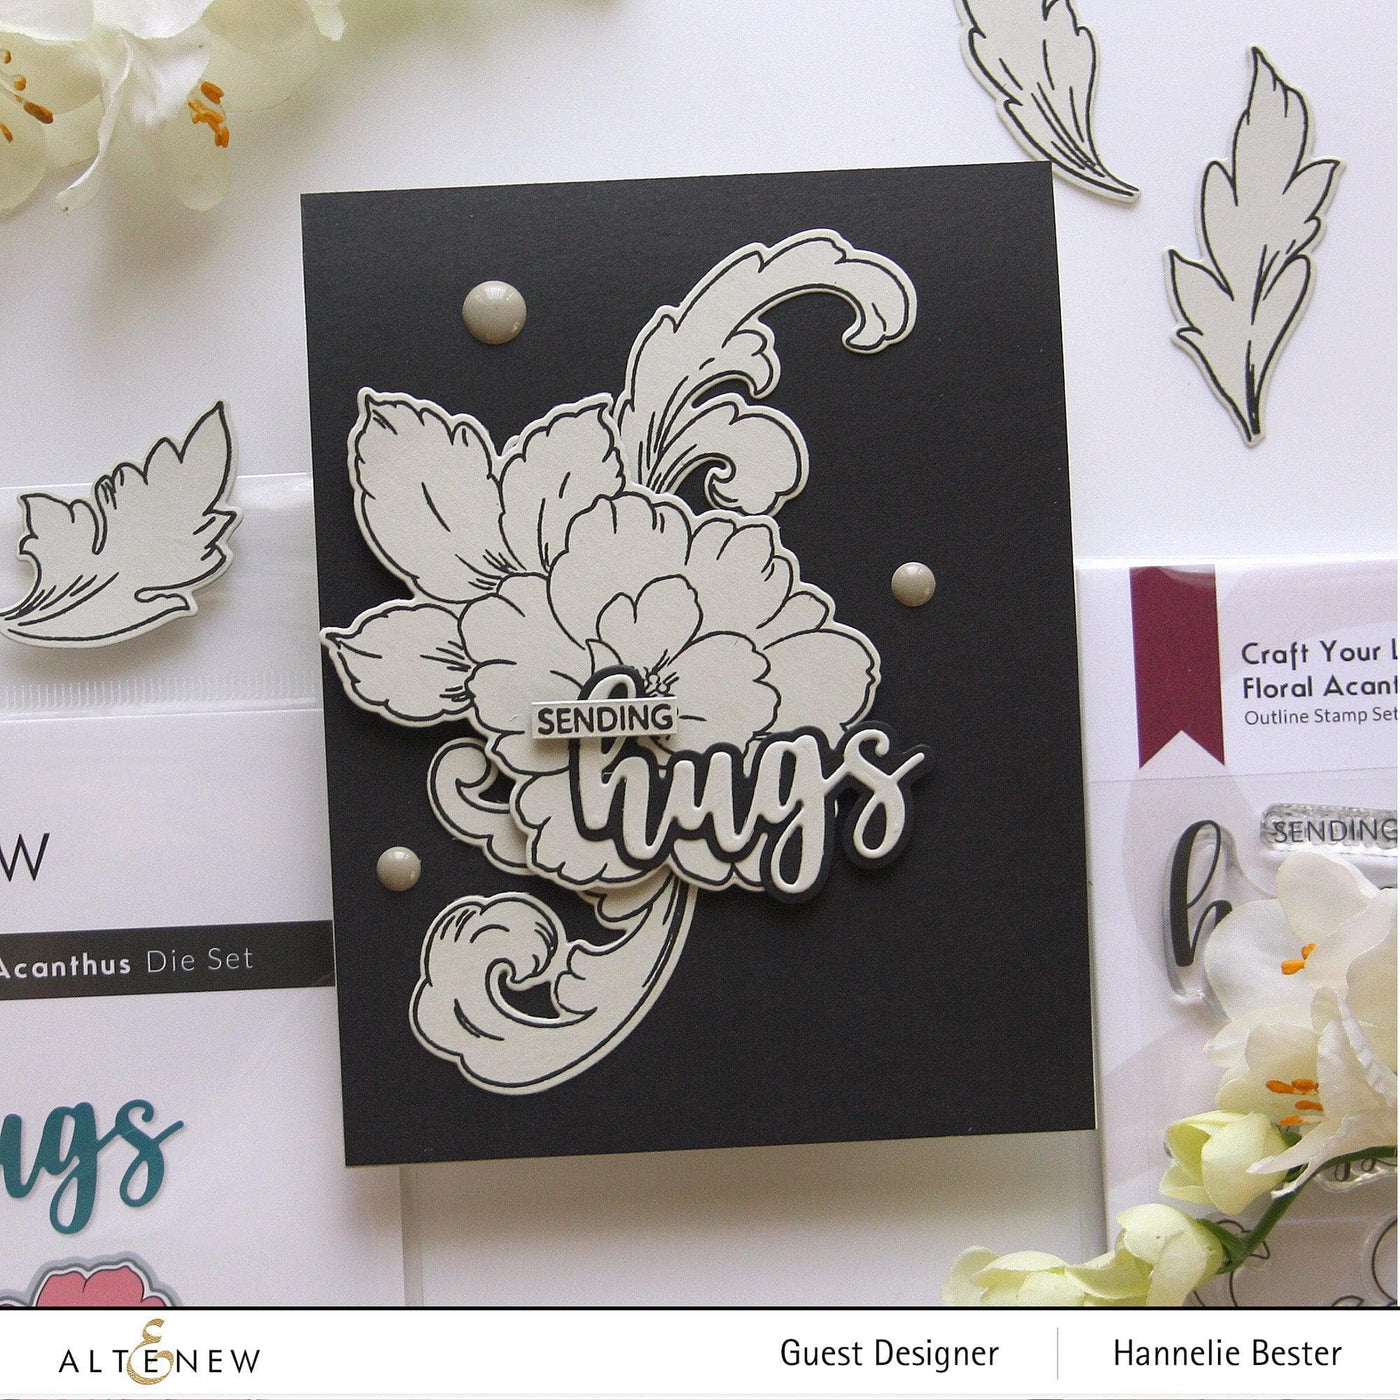 Altenew Craft Your Life Project Kit - Garden Rose Stamps, Dies, Stencils, Embossing Folder